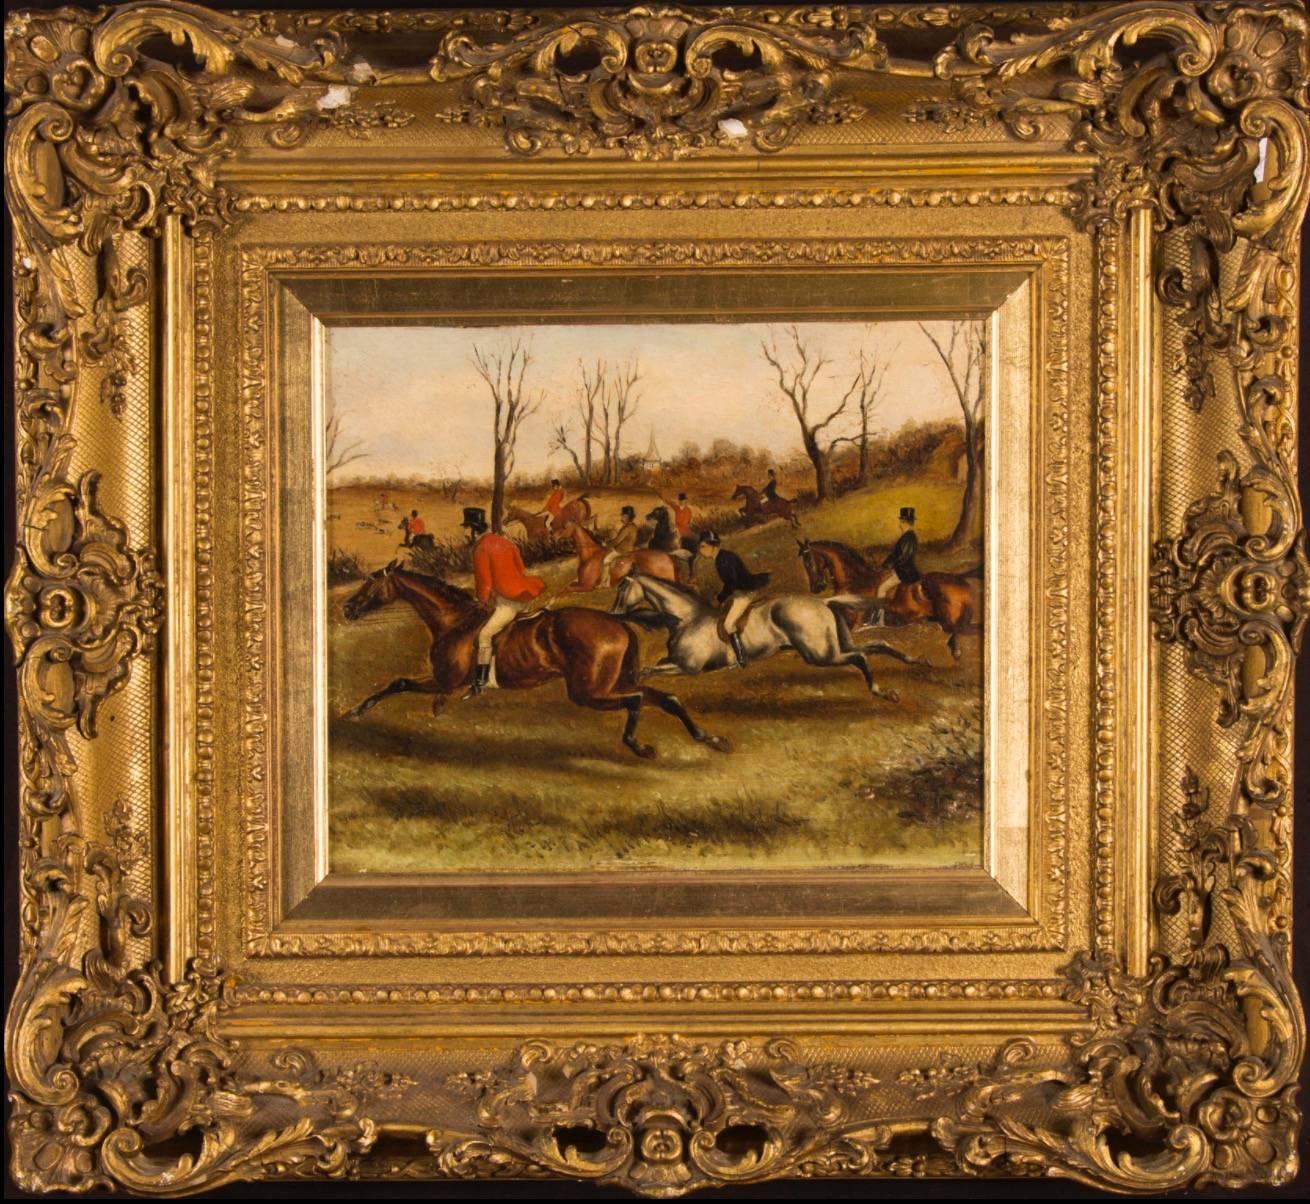 Unknown Animal Painting - Victorian English Hunting Scene Oil Painting - Amazing Gilt Frame